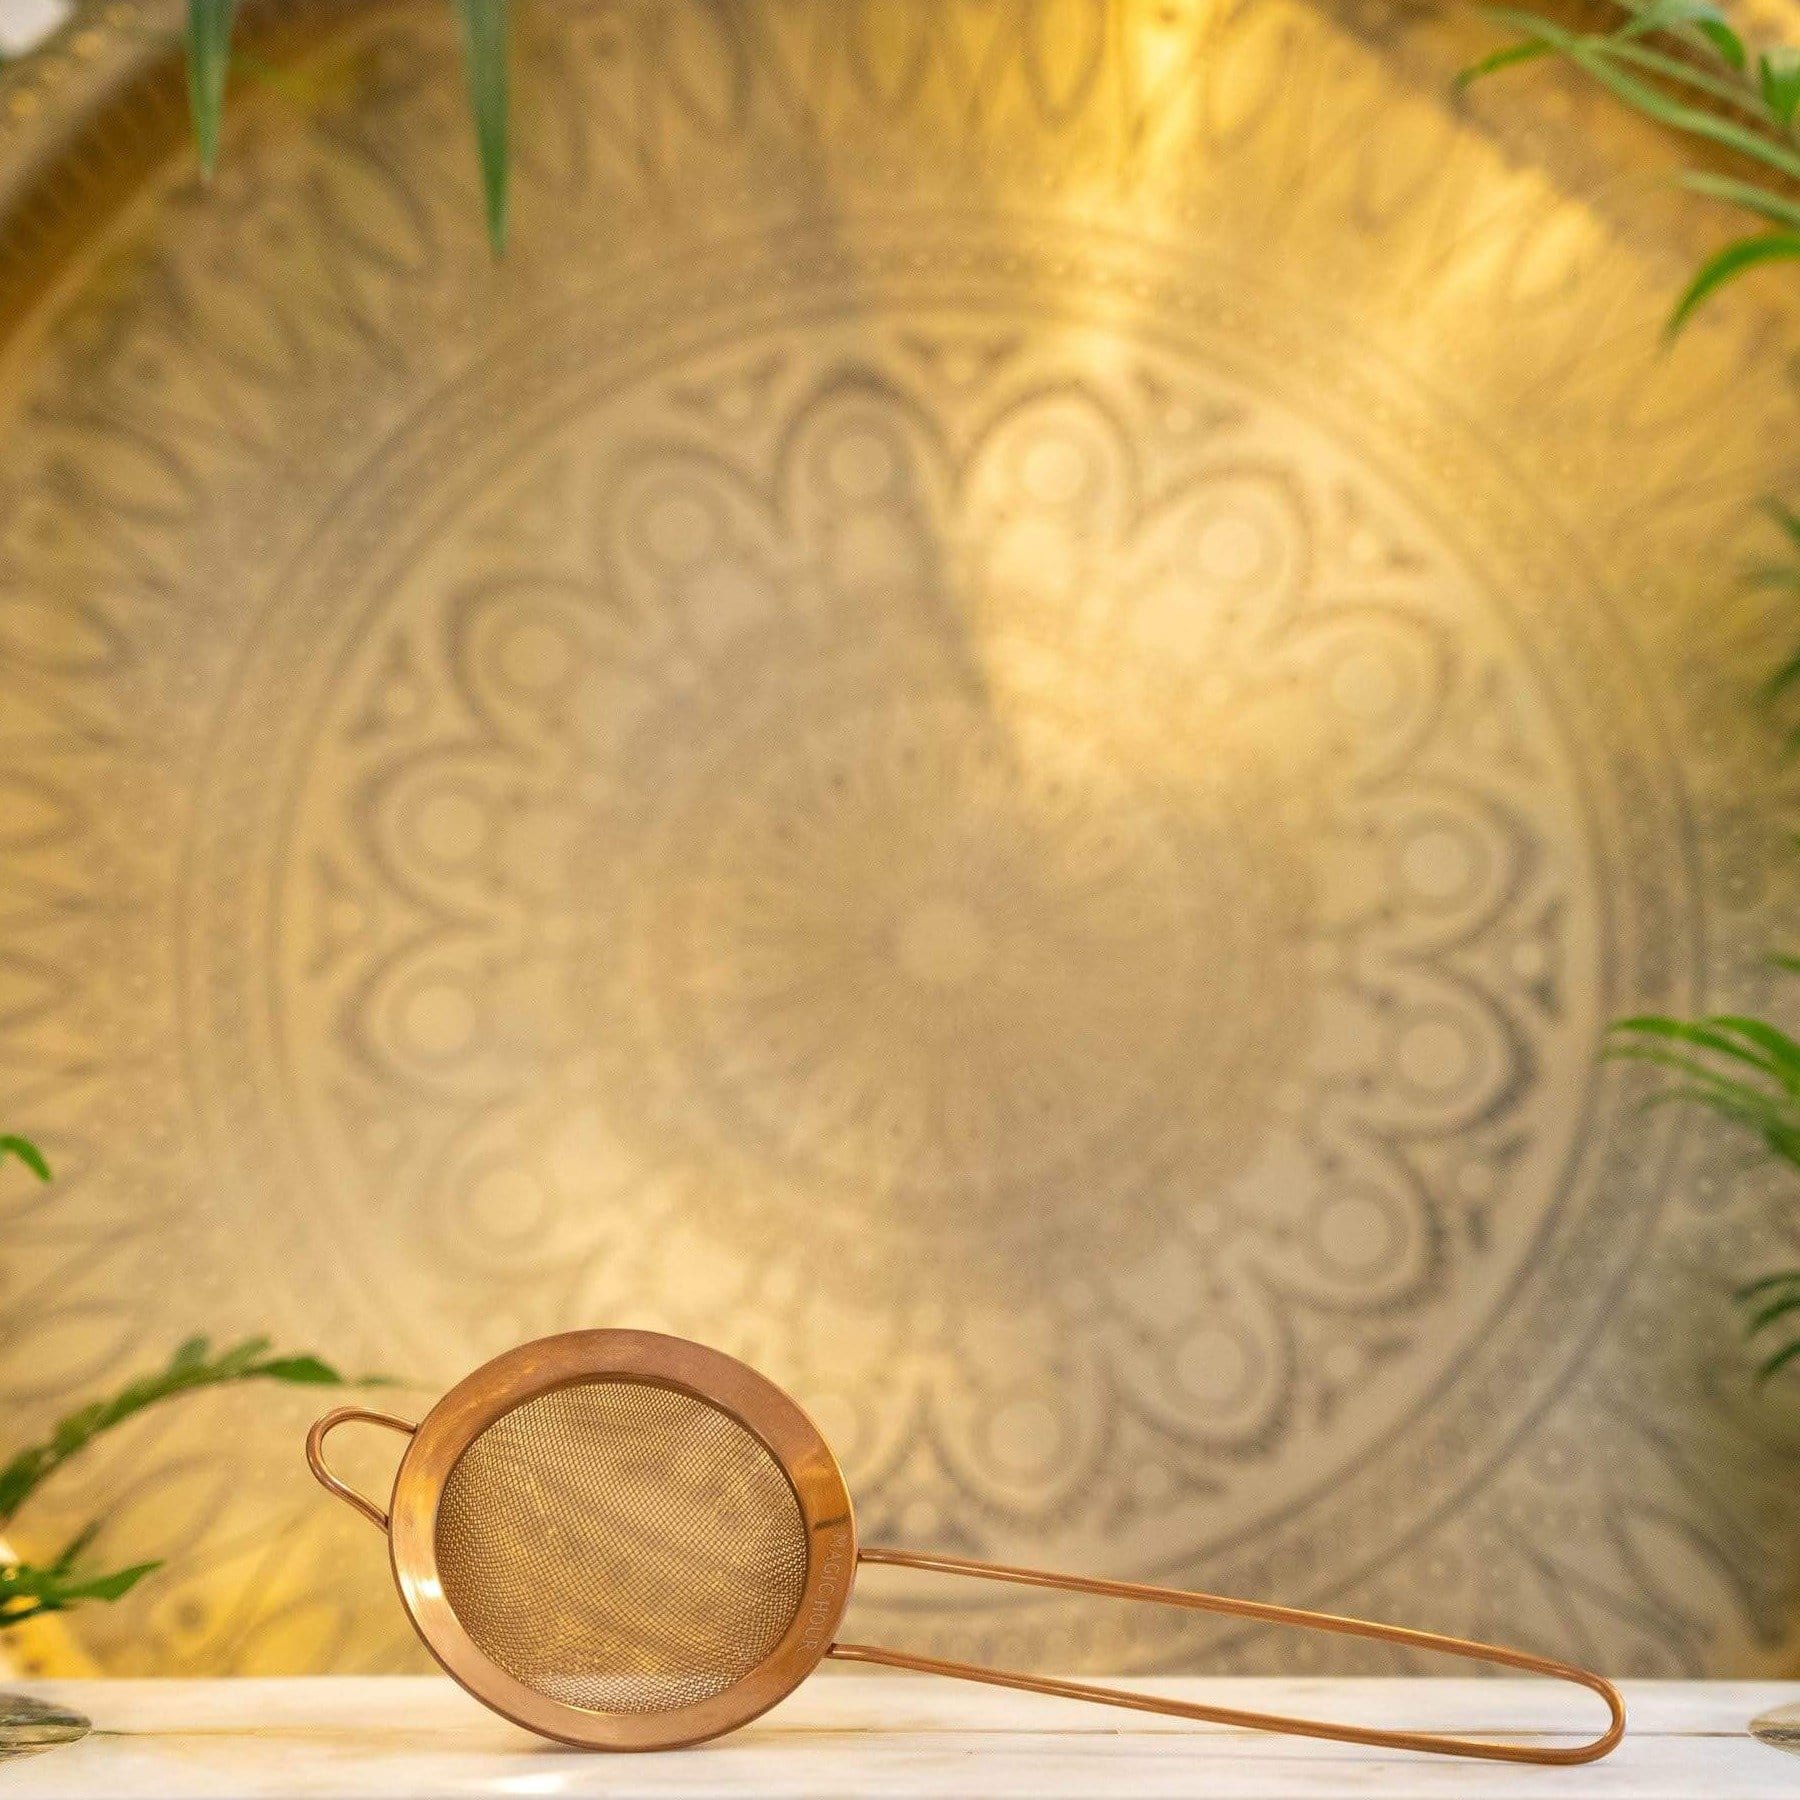 A Rose Gold Matcha Sift rests on a white surface with a detailed, golden mandala pattern in the background, illuminated by warm, soft lighting. Green foliage partially frames the scene, contributing to the serene and elegant ambiance—perfect for a moment with Magic Hour.